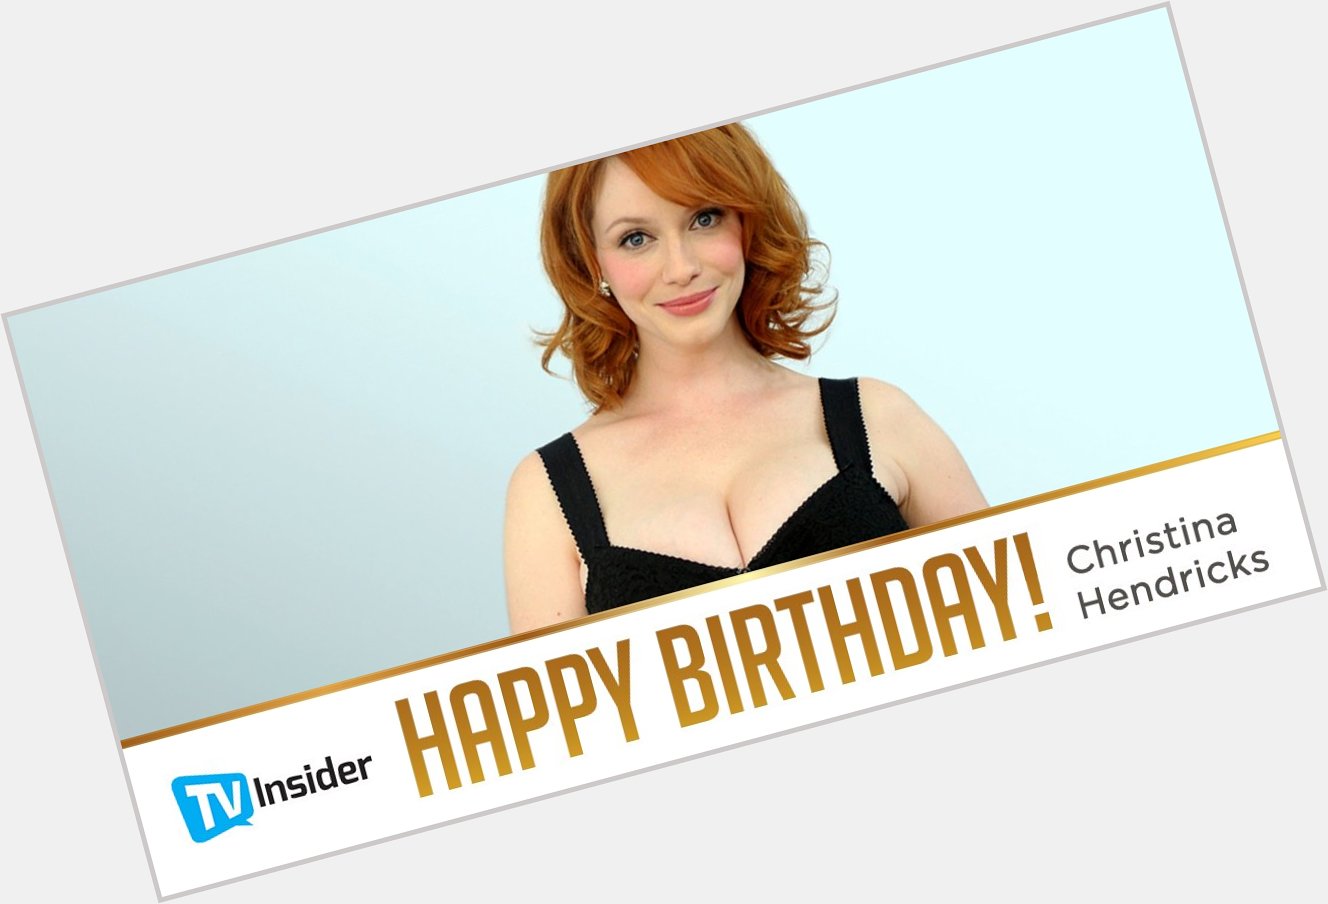 Here\s a shout out to all the Happy birthday, Christina Hendricks. Visit:  